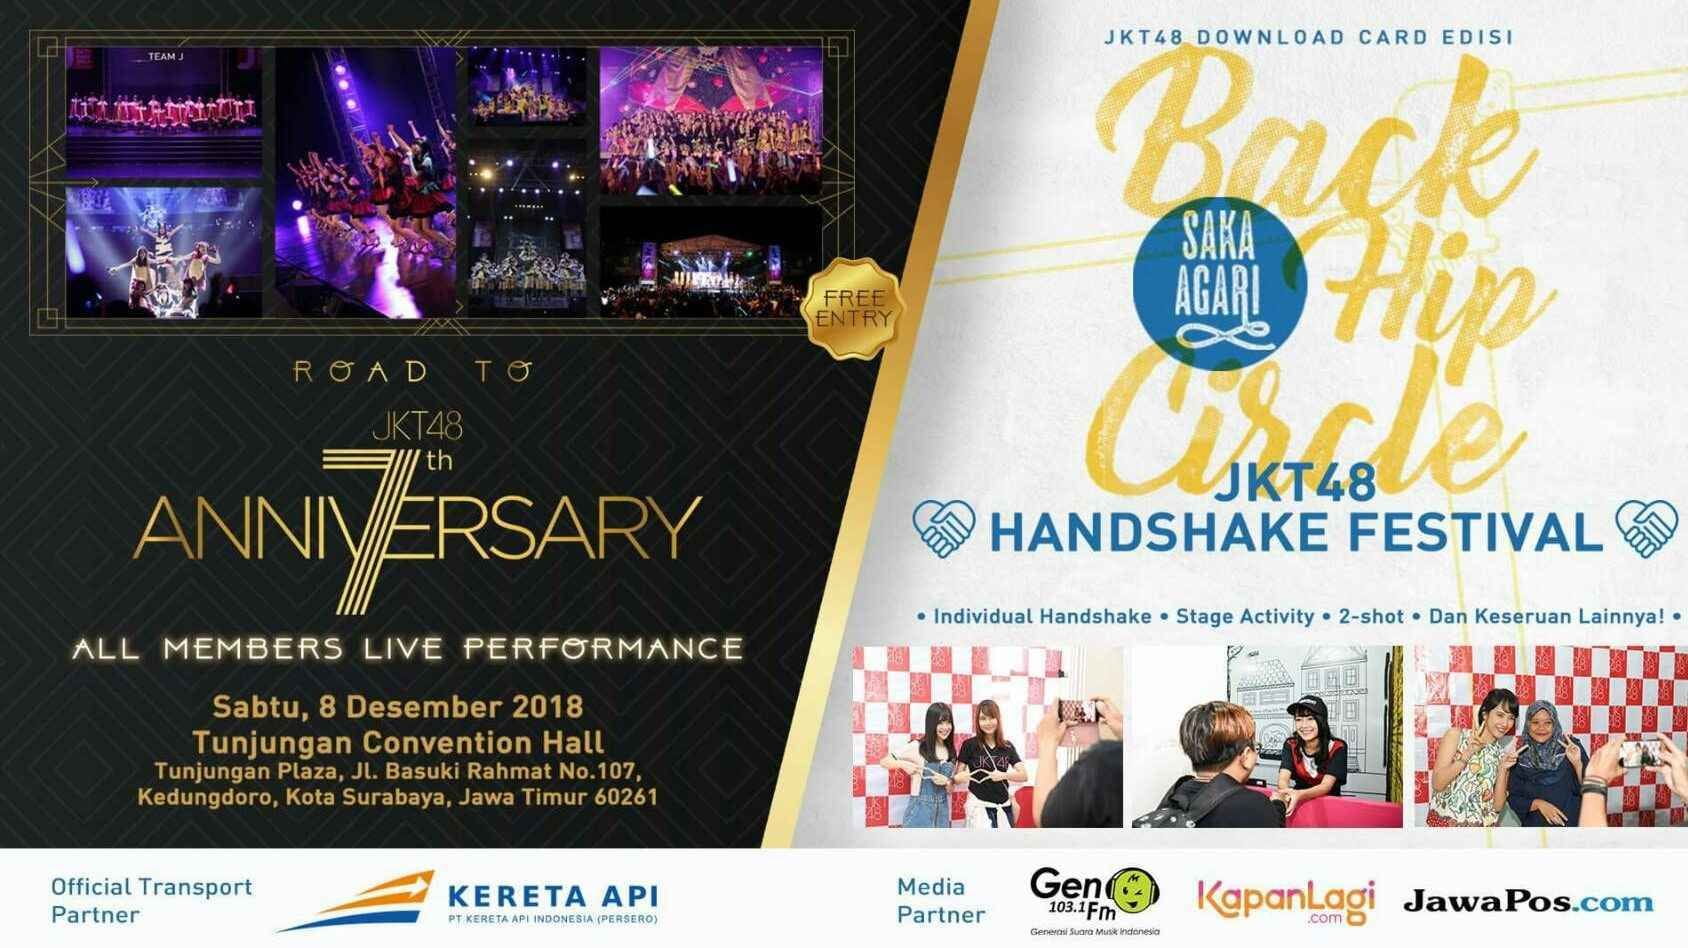 Road to JKT48 7th Anniversary